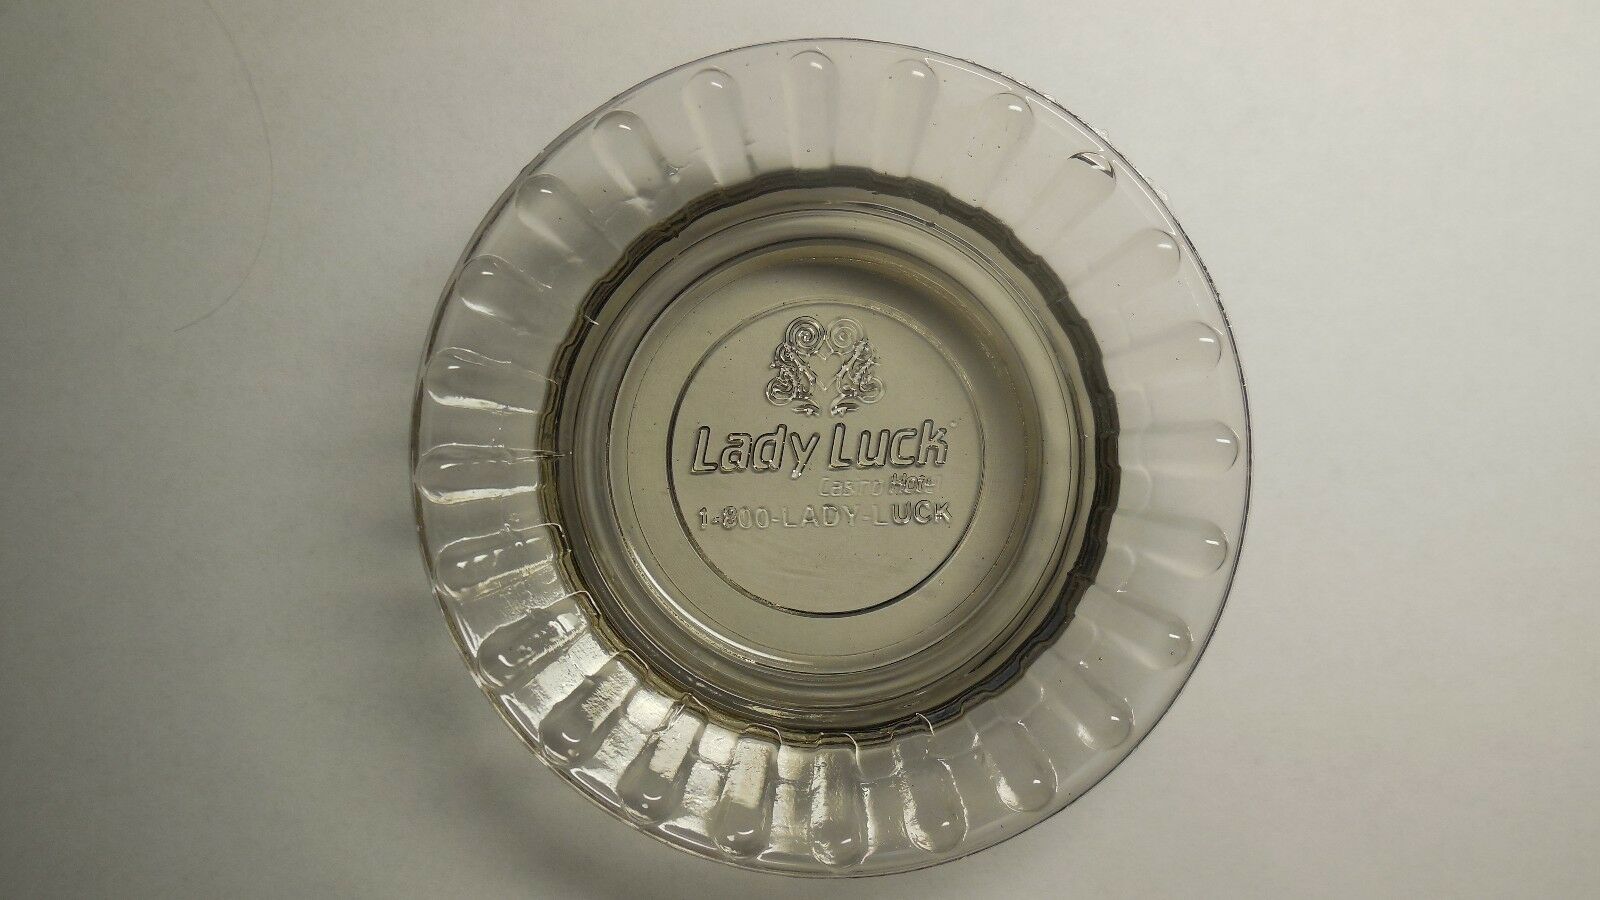 Vintage Ashtray From Lady Luck Casino In Las Vegas, Nevada